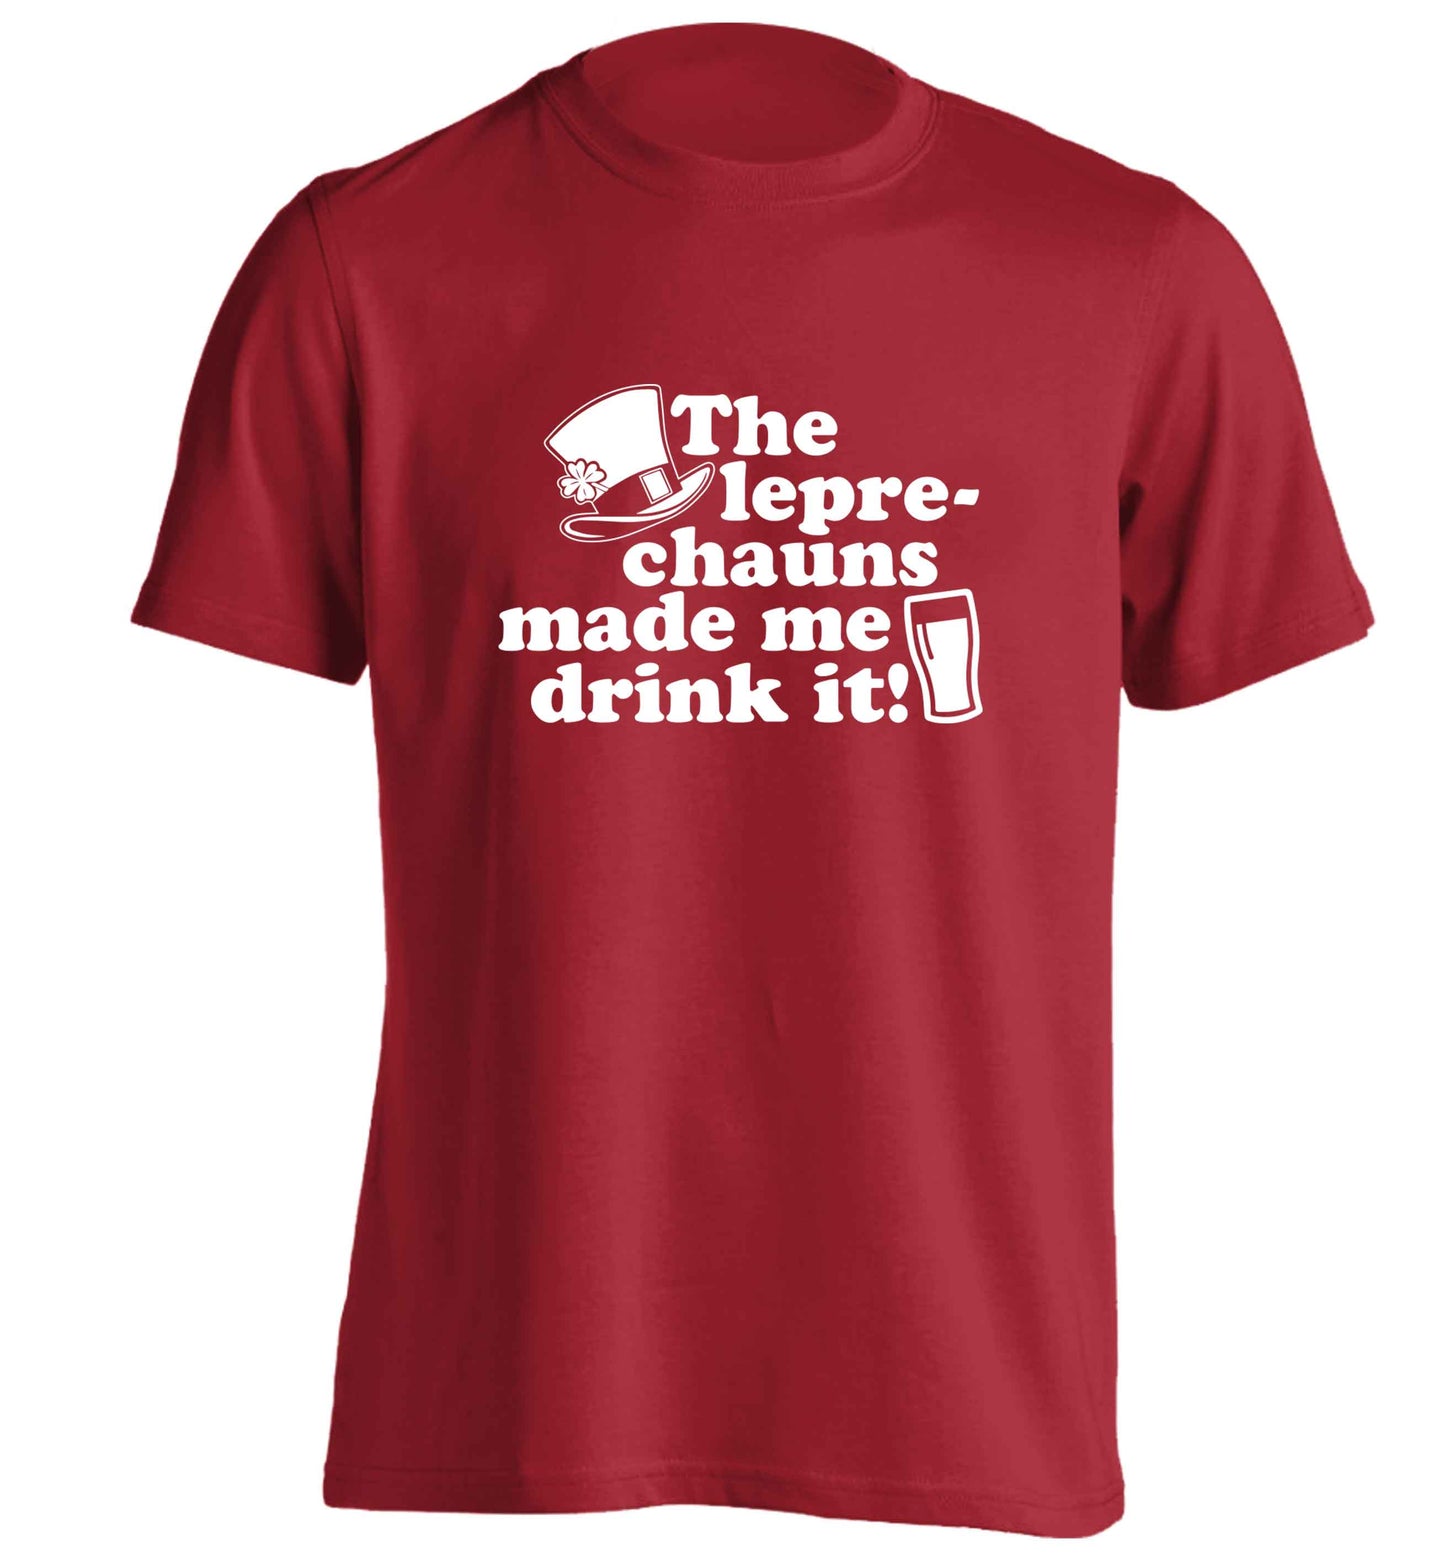 The leprechauns made me drink it adults unisex red Tshirt 2XL